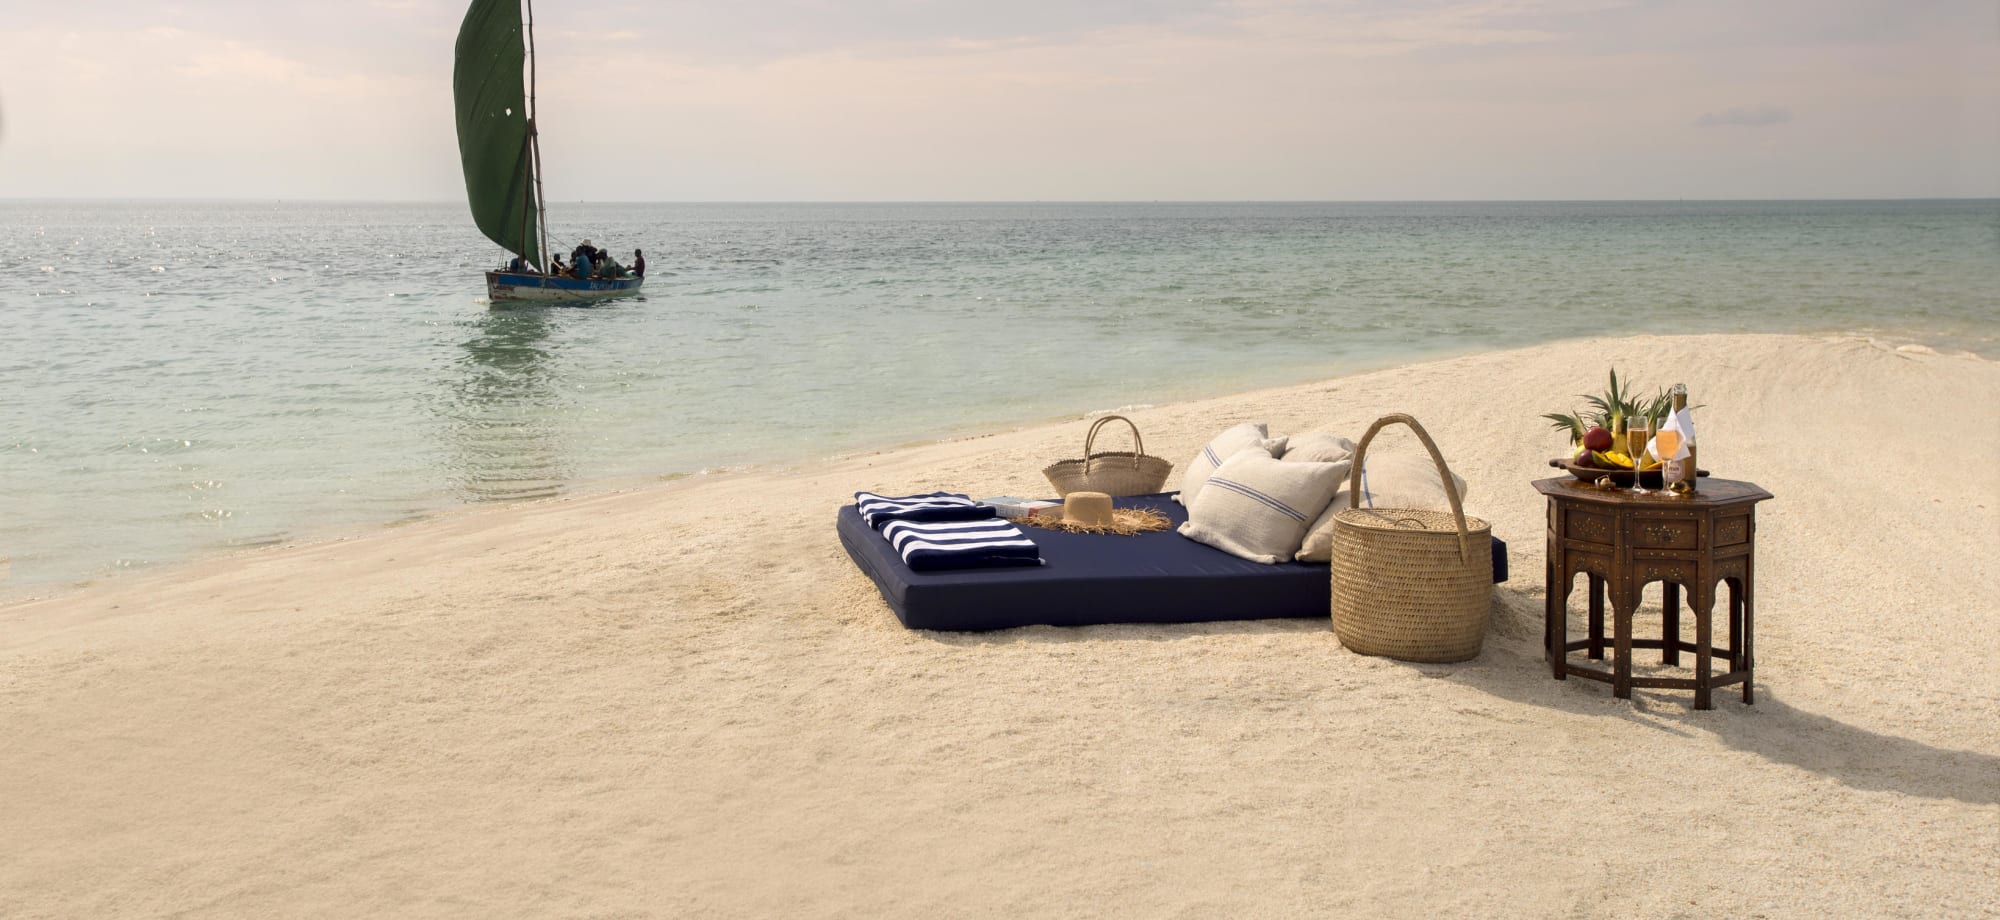 A sailing boat sits in the sea while a picnic table and blanket is laid out on the sand.